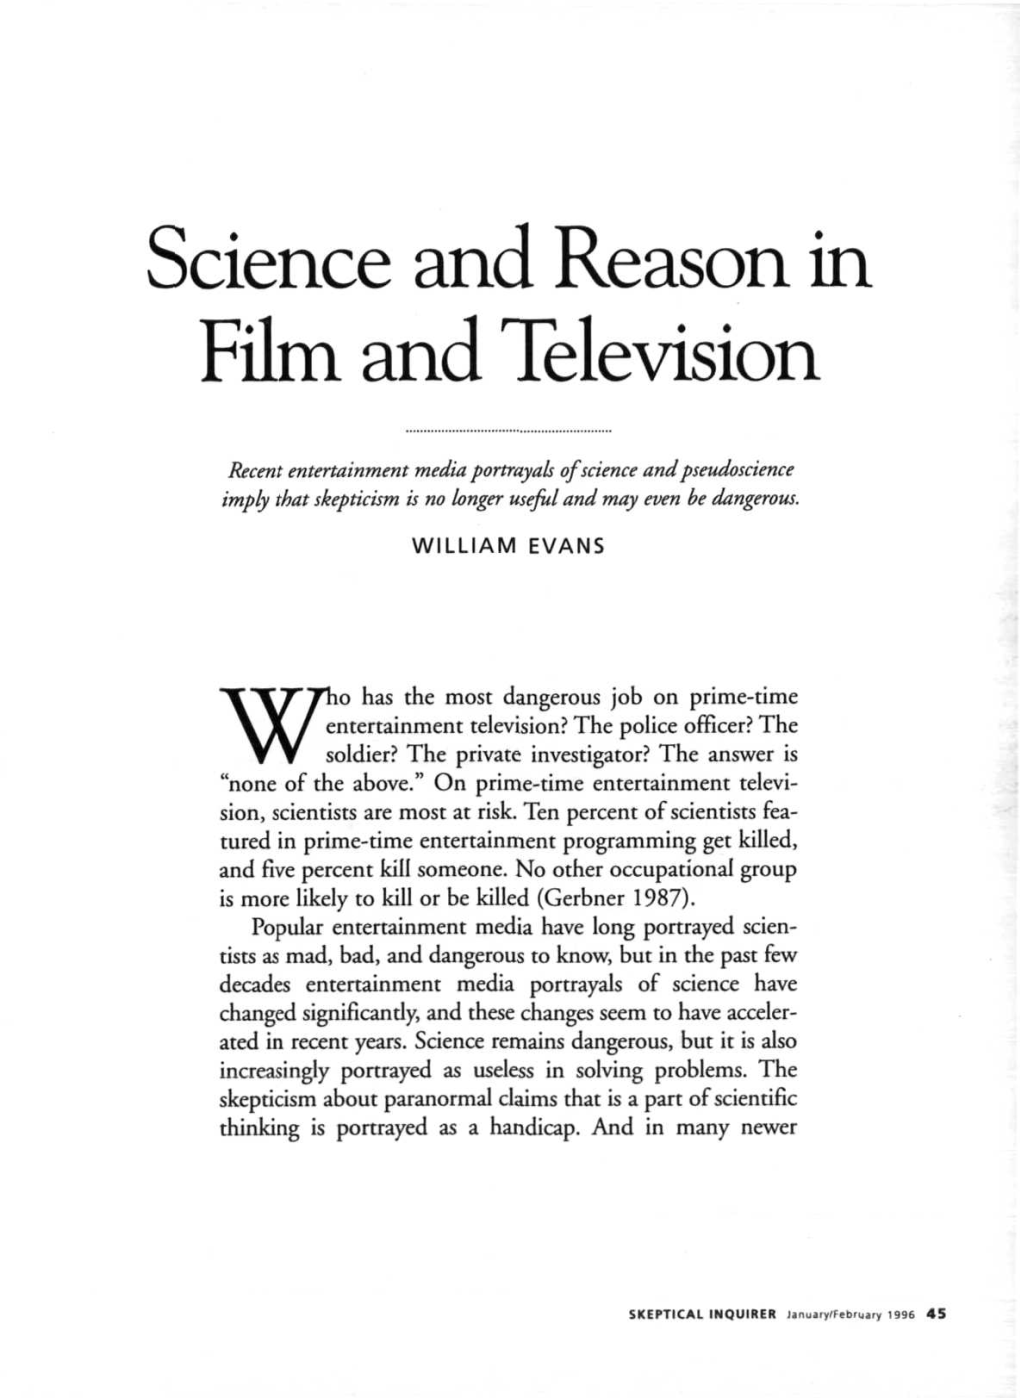 Science and Reason in Film and Television